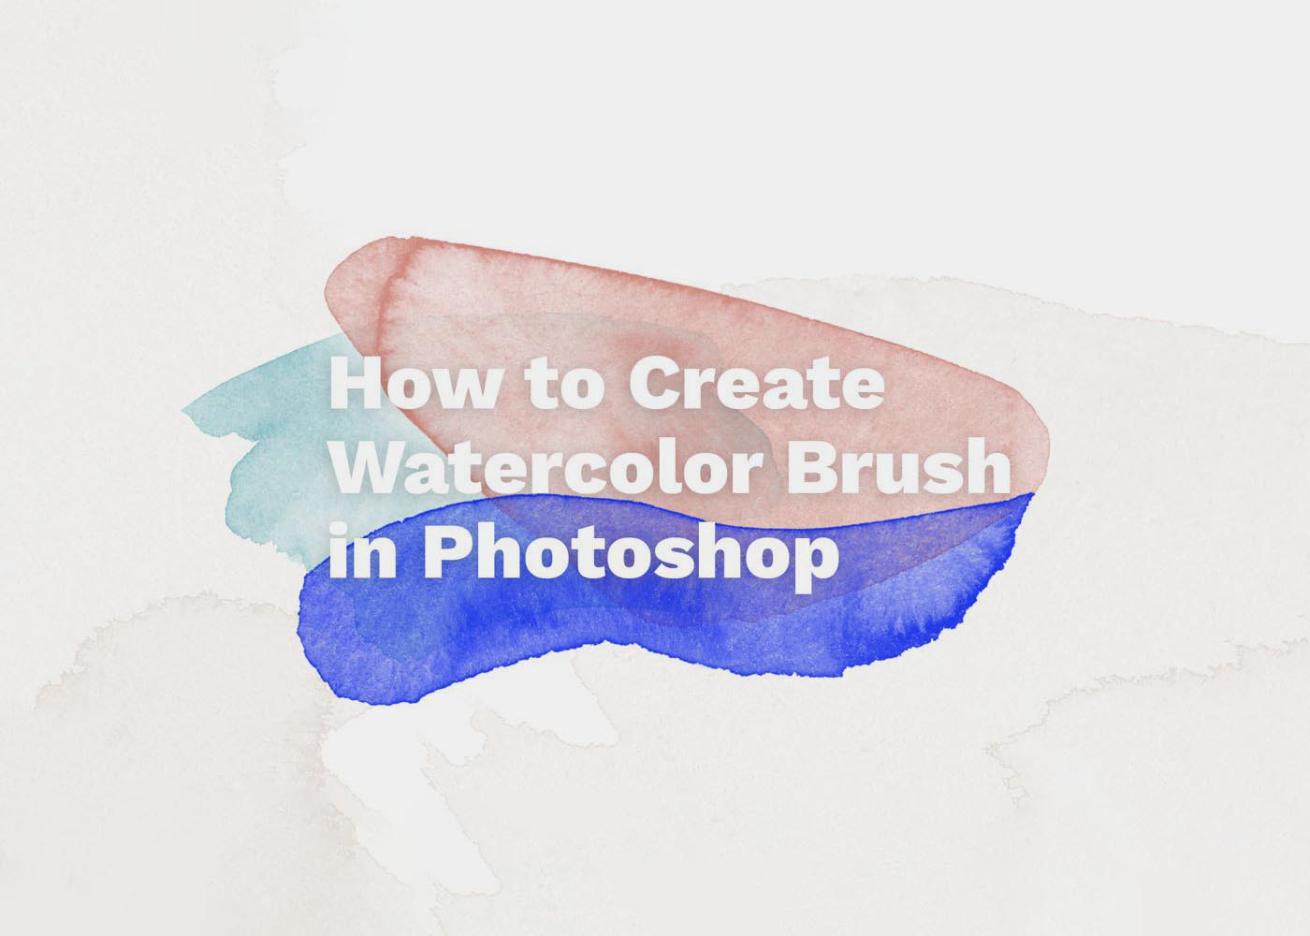 How to create a watercolor brush in Photoshop?